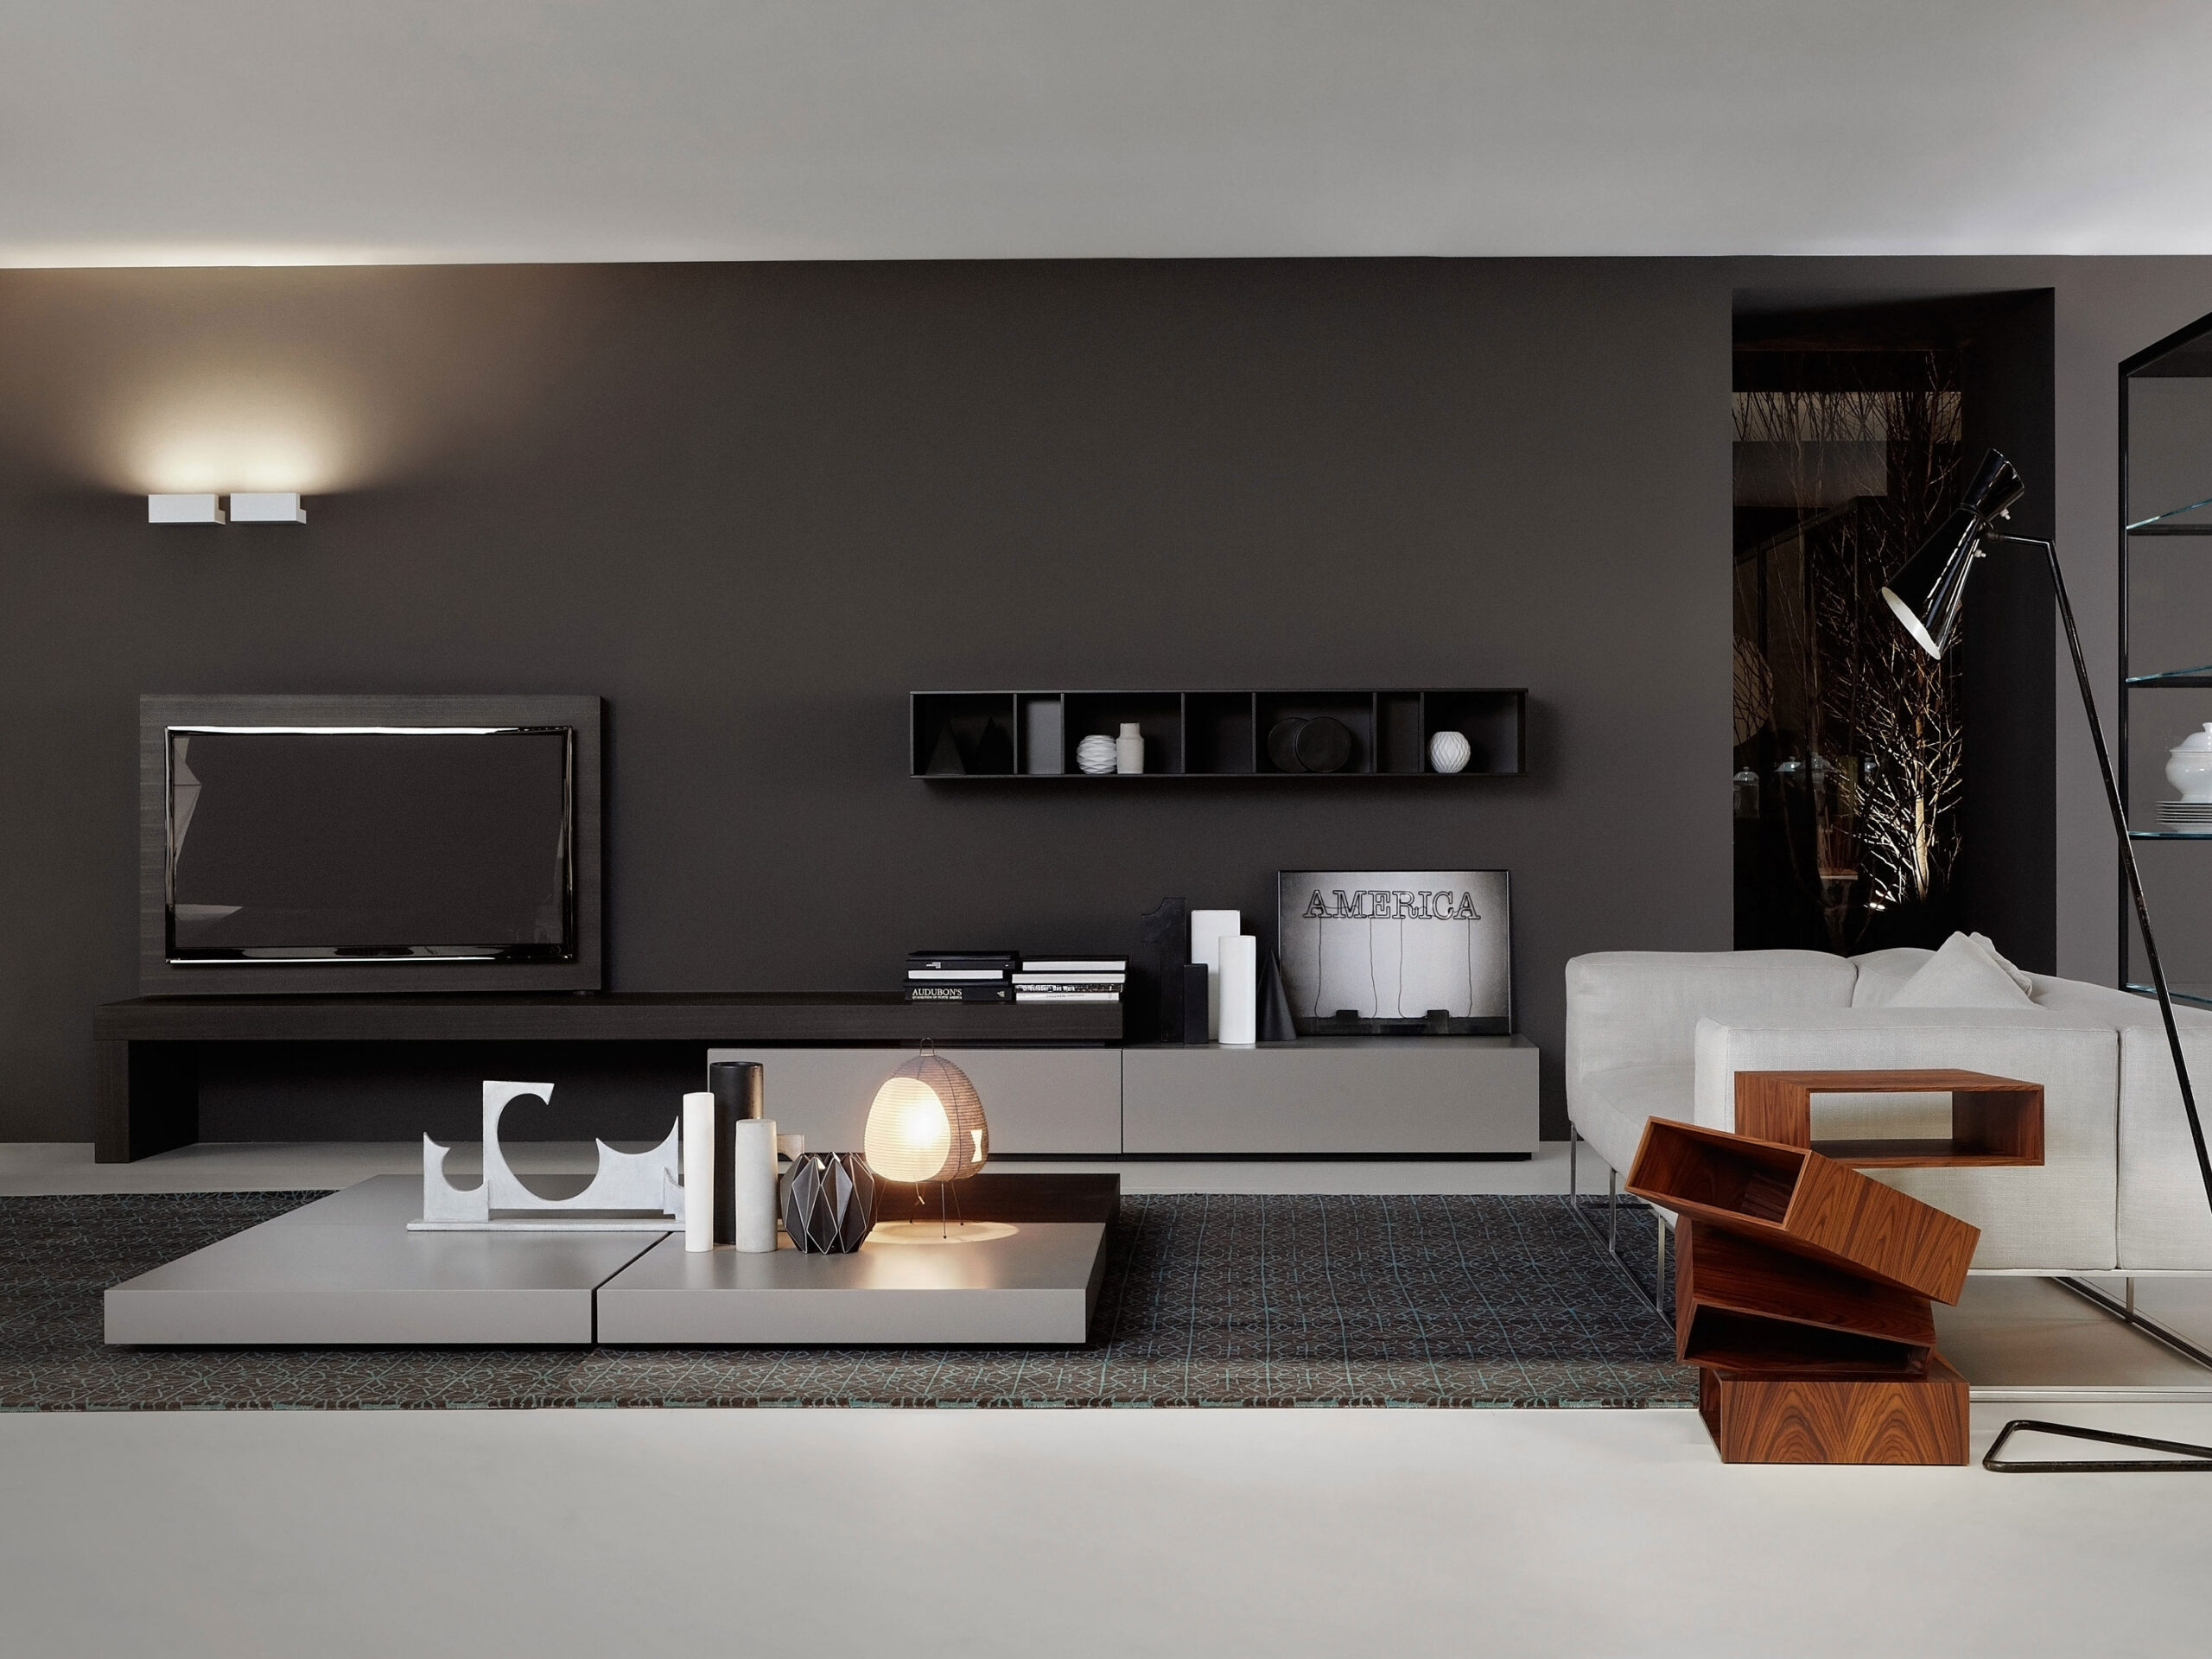 design-oriented TV not only also but - furniture practical,